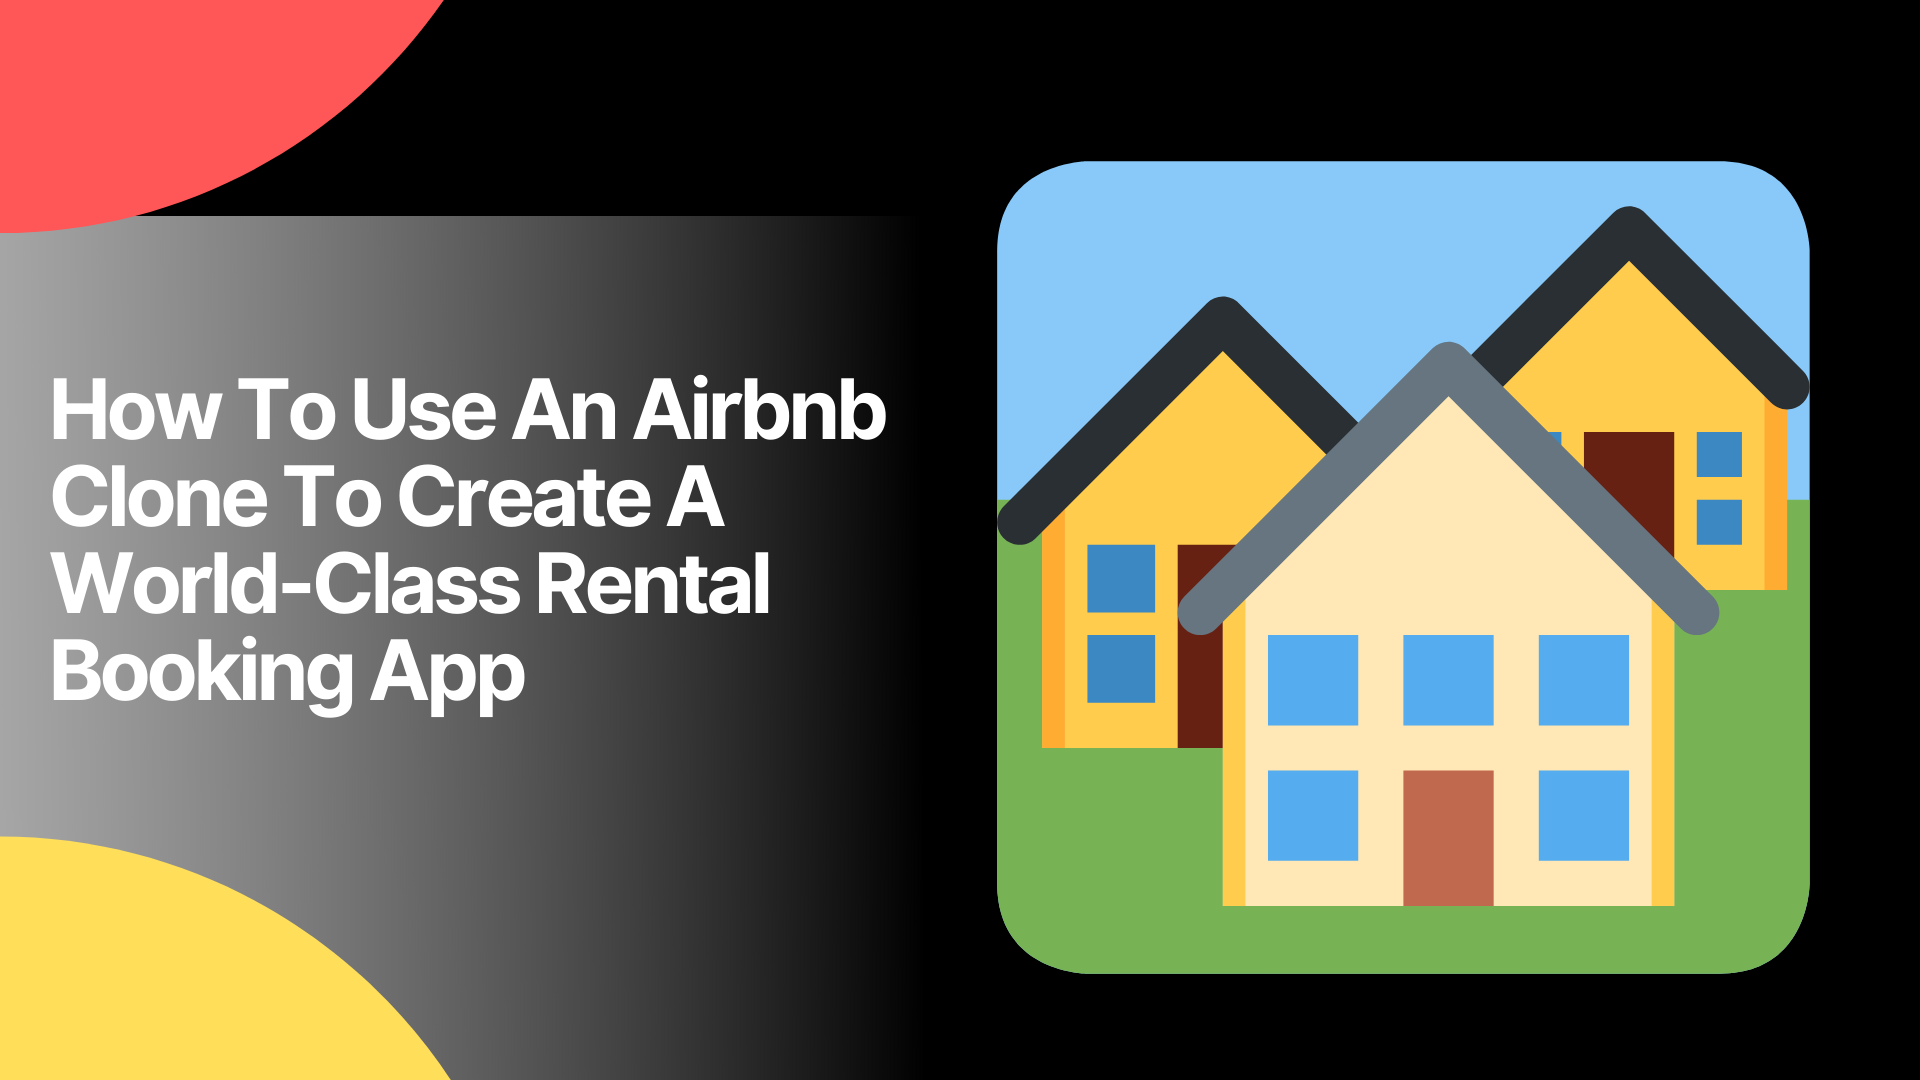 How To Use An Airbnb Clone To Create A World-Class Rental Booking App